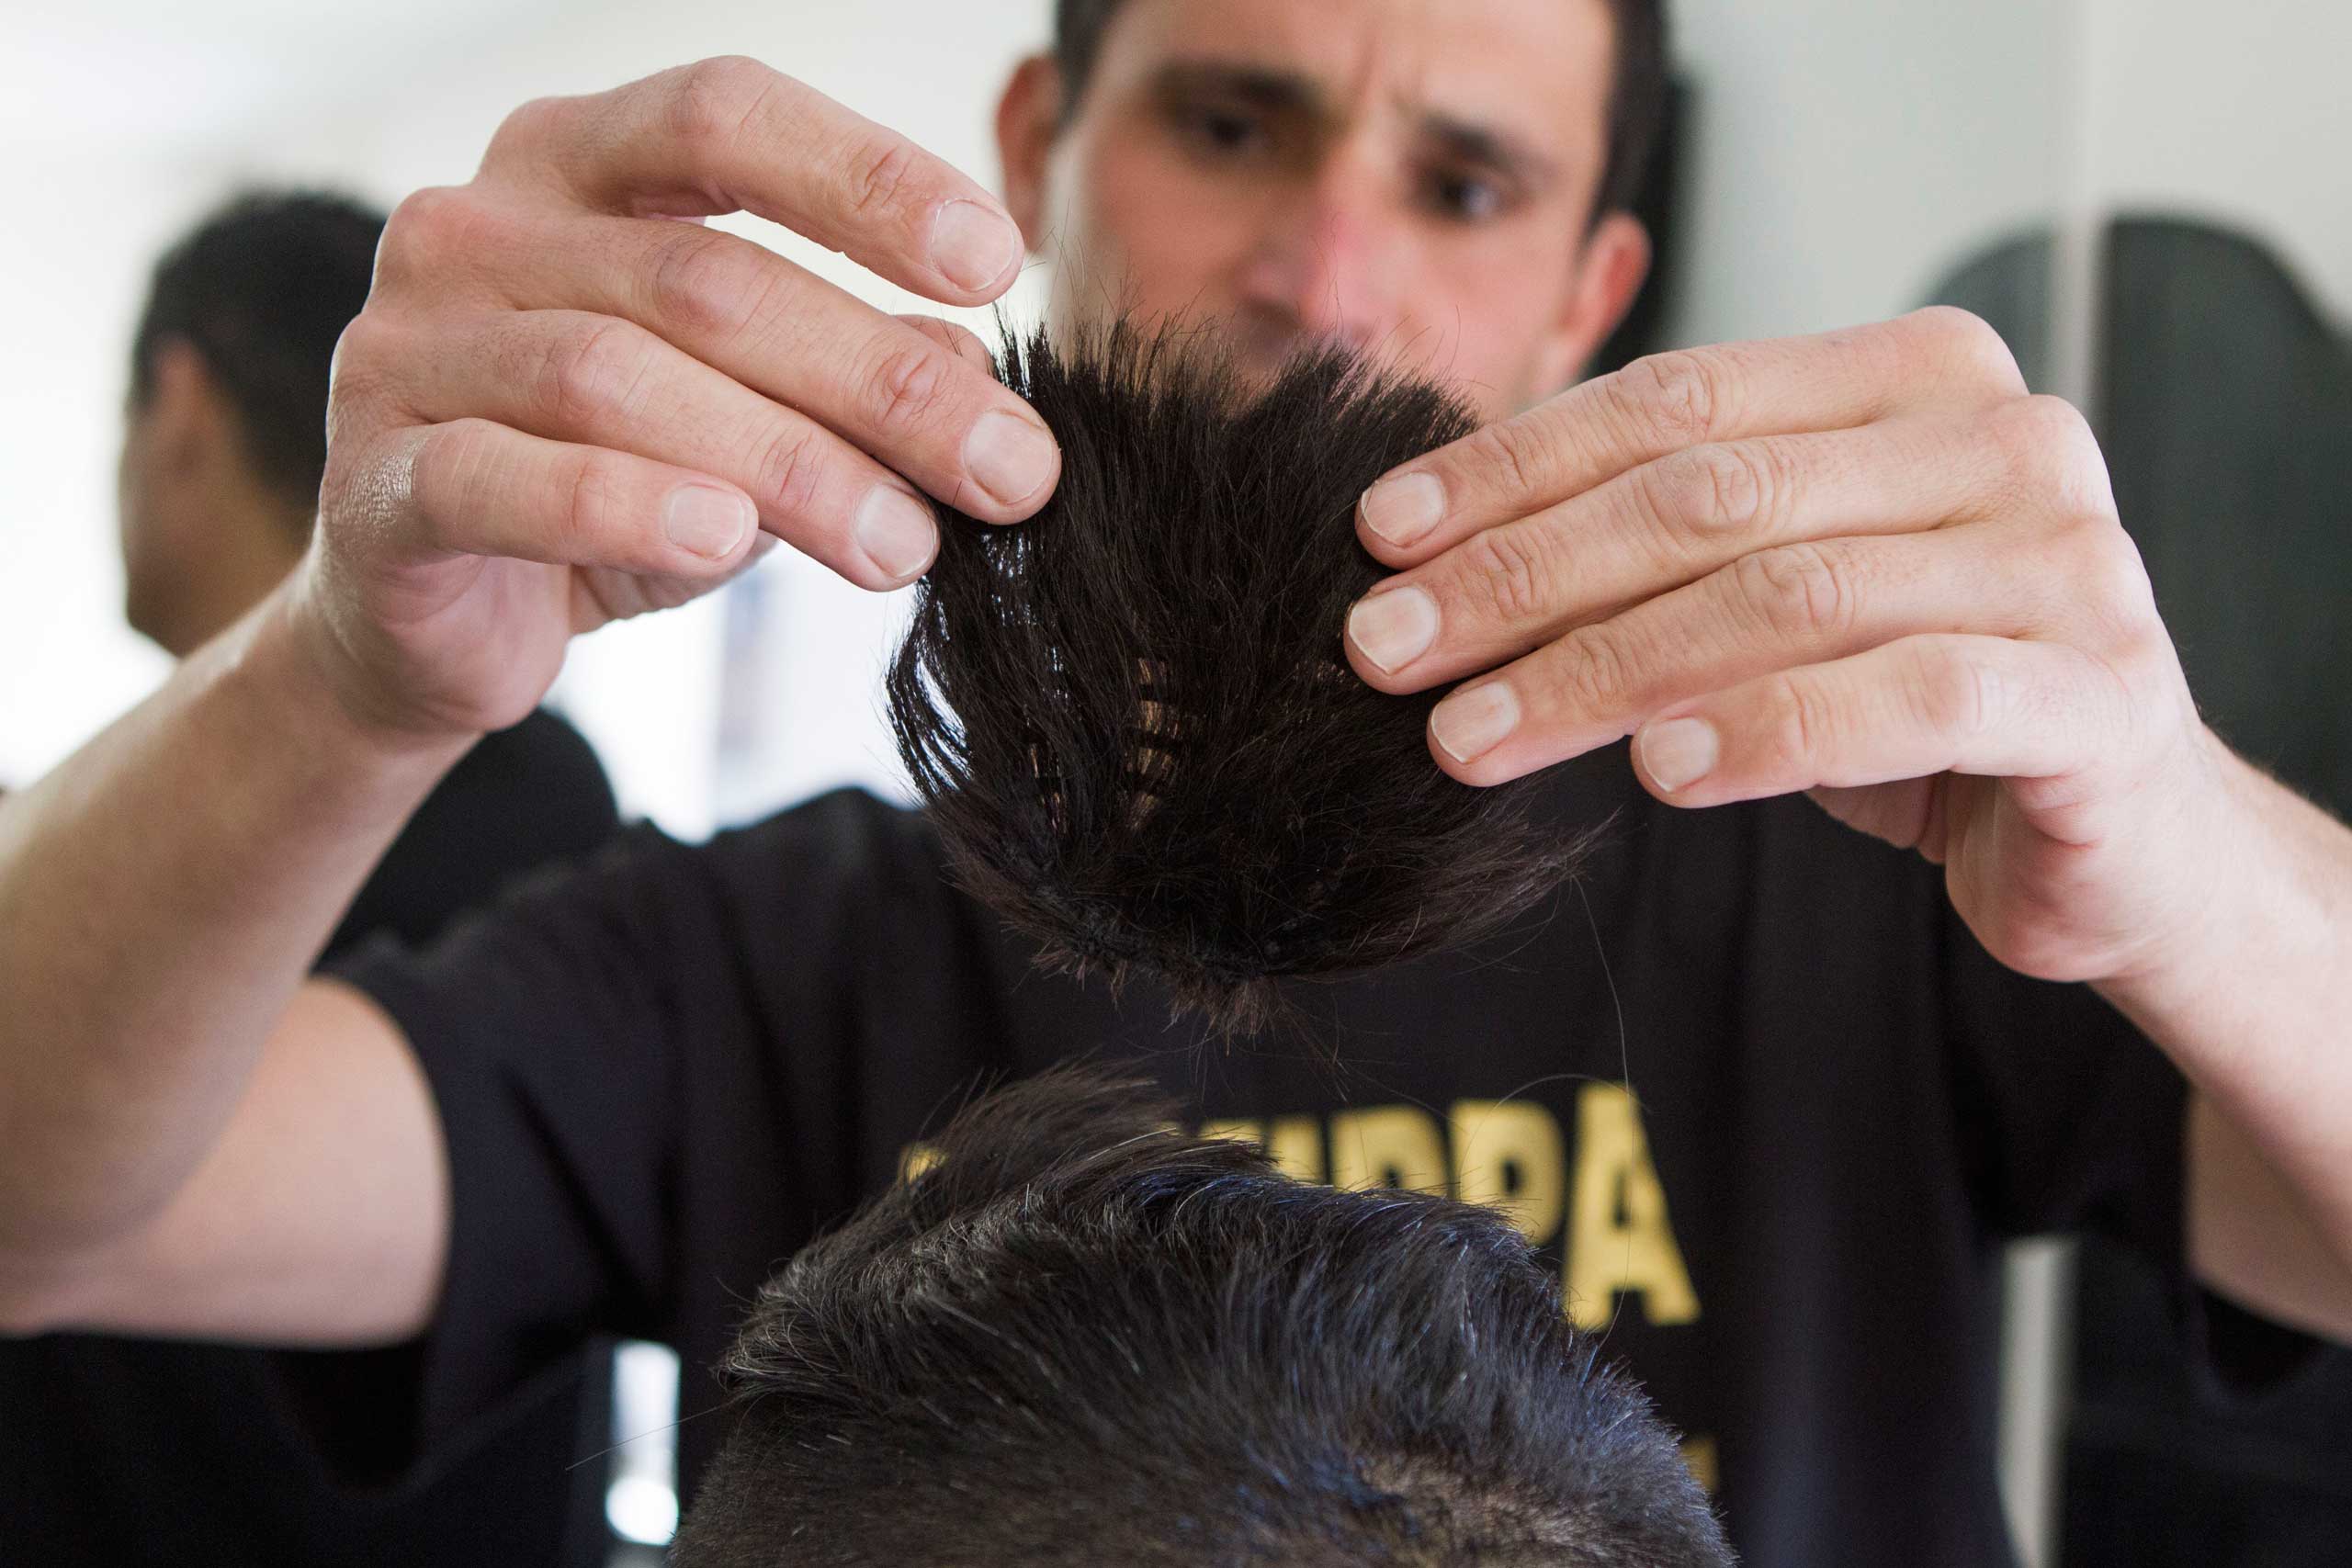 Israeli hairdresser Shalom Koresh places a yarmulke, a skullcap made of hair samples, on a man's head in the city of Rehovot, Israel on Jan. 21, 2015. (Dan Balilty—AP)